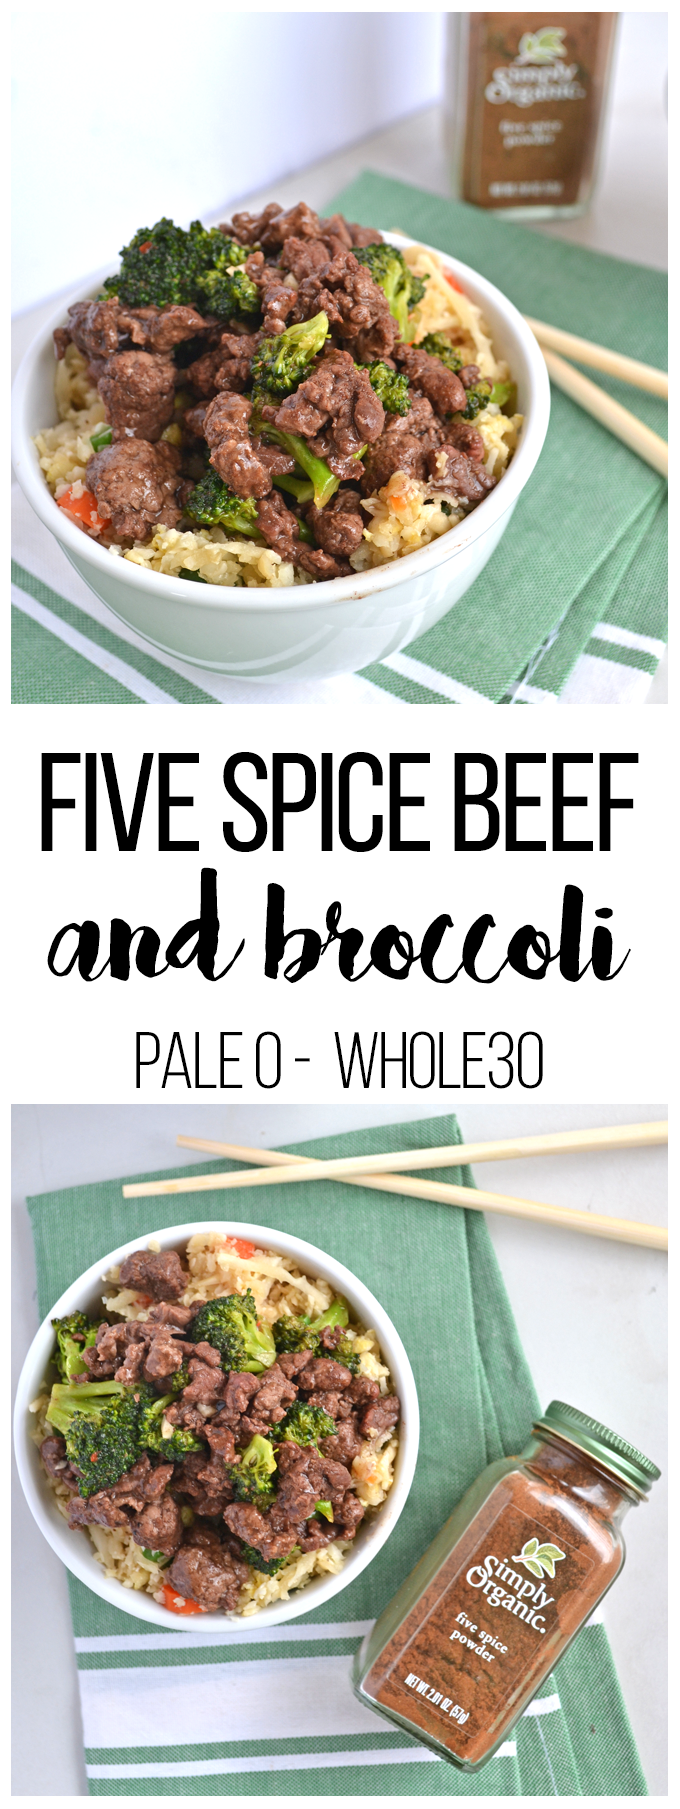 When you are craving chinese food on Whole30 this 5 Spice Beef & Broccoli hits the spot! Simple to throw together, and full of flavor thanks to Simply Organics Five Spice Powder! Paleo// healthy